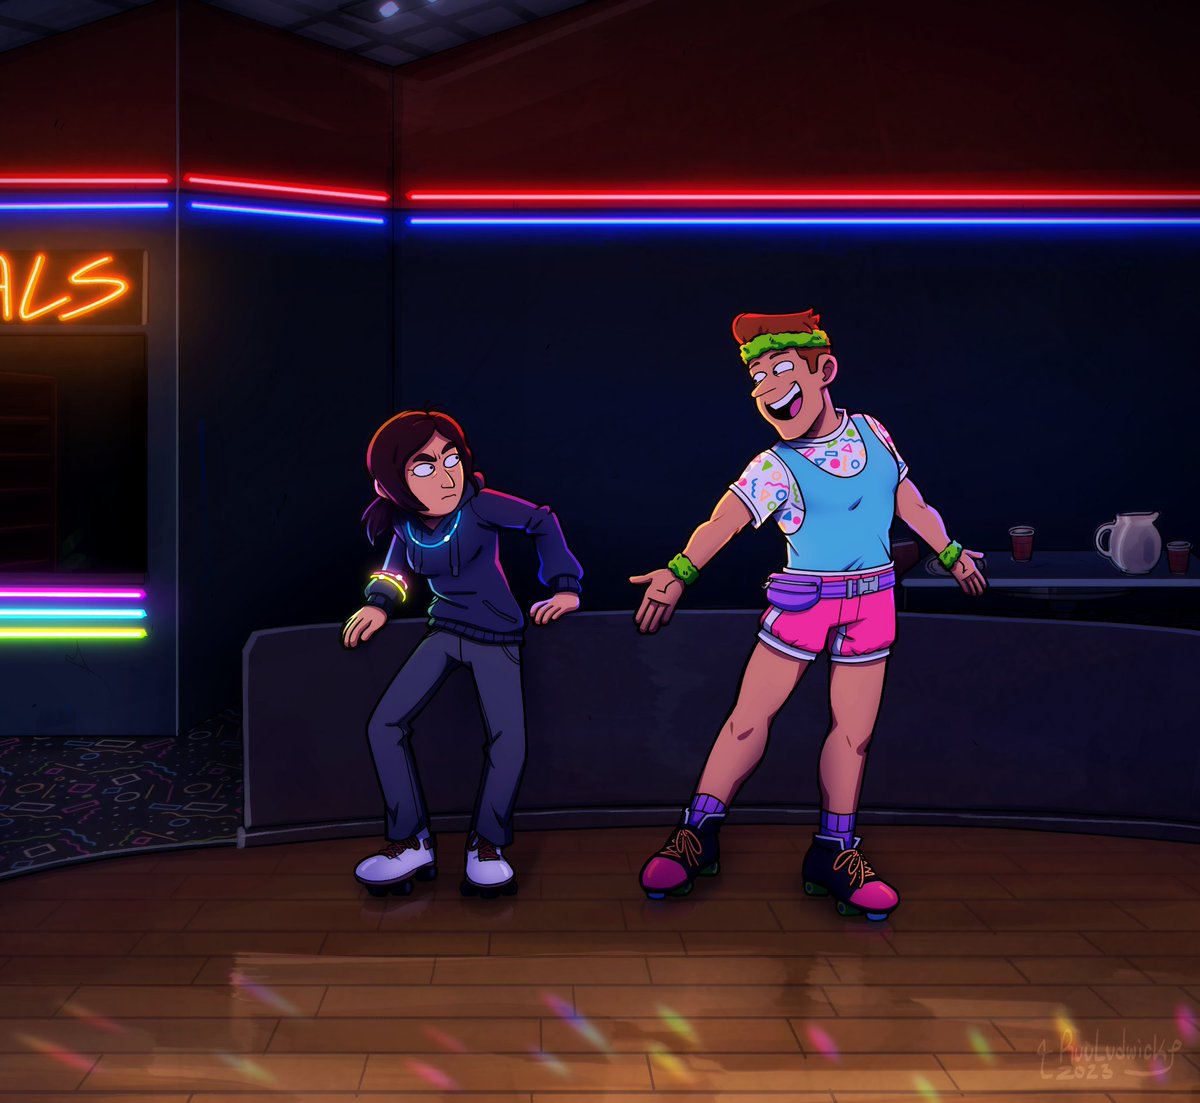 I bet Brett would pressure Reagan to go to one of those epic run down 80s rollerblading rinks.
I had a lot of fun drawing this!
#insidejob #insidejobfanart